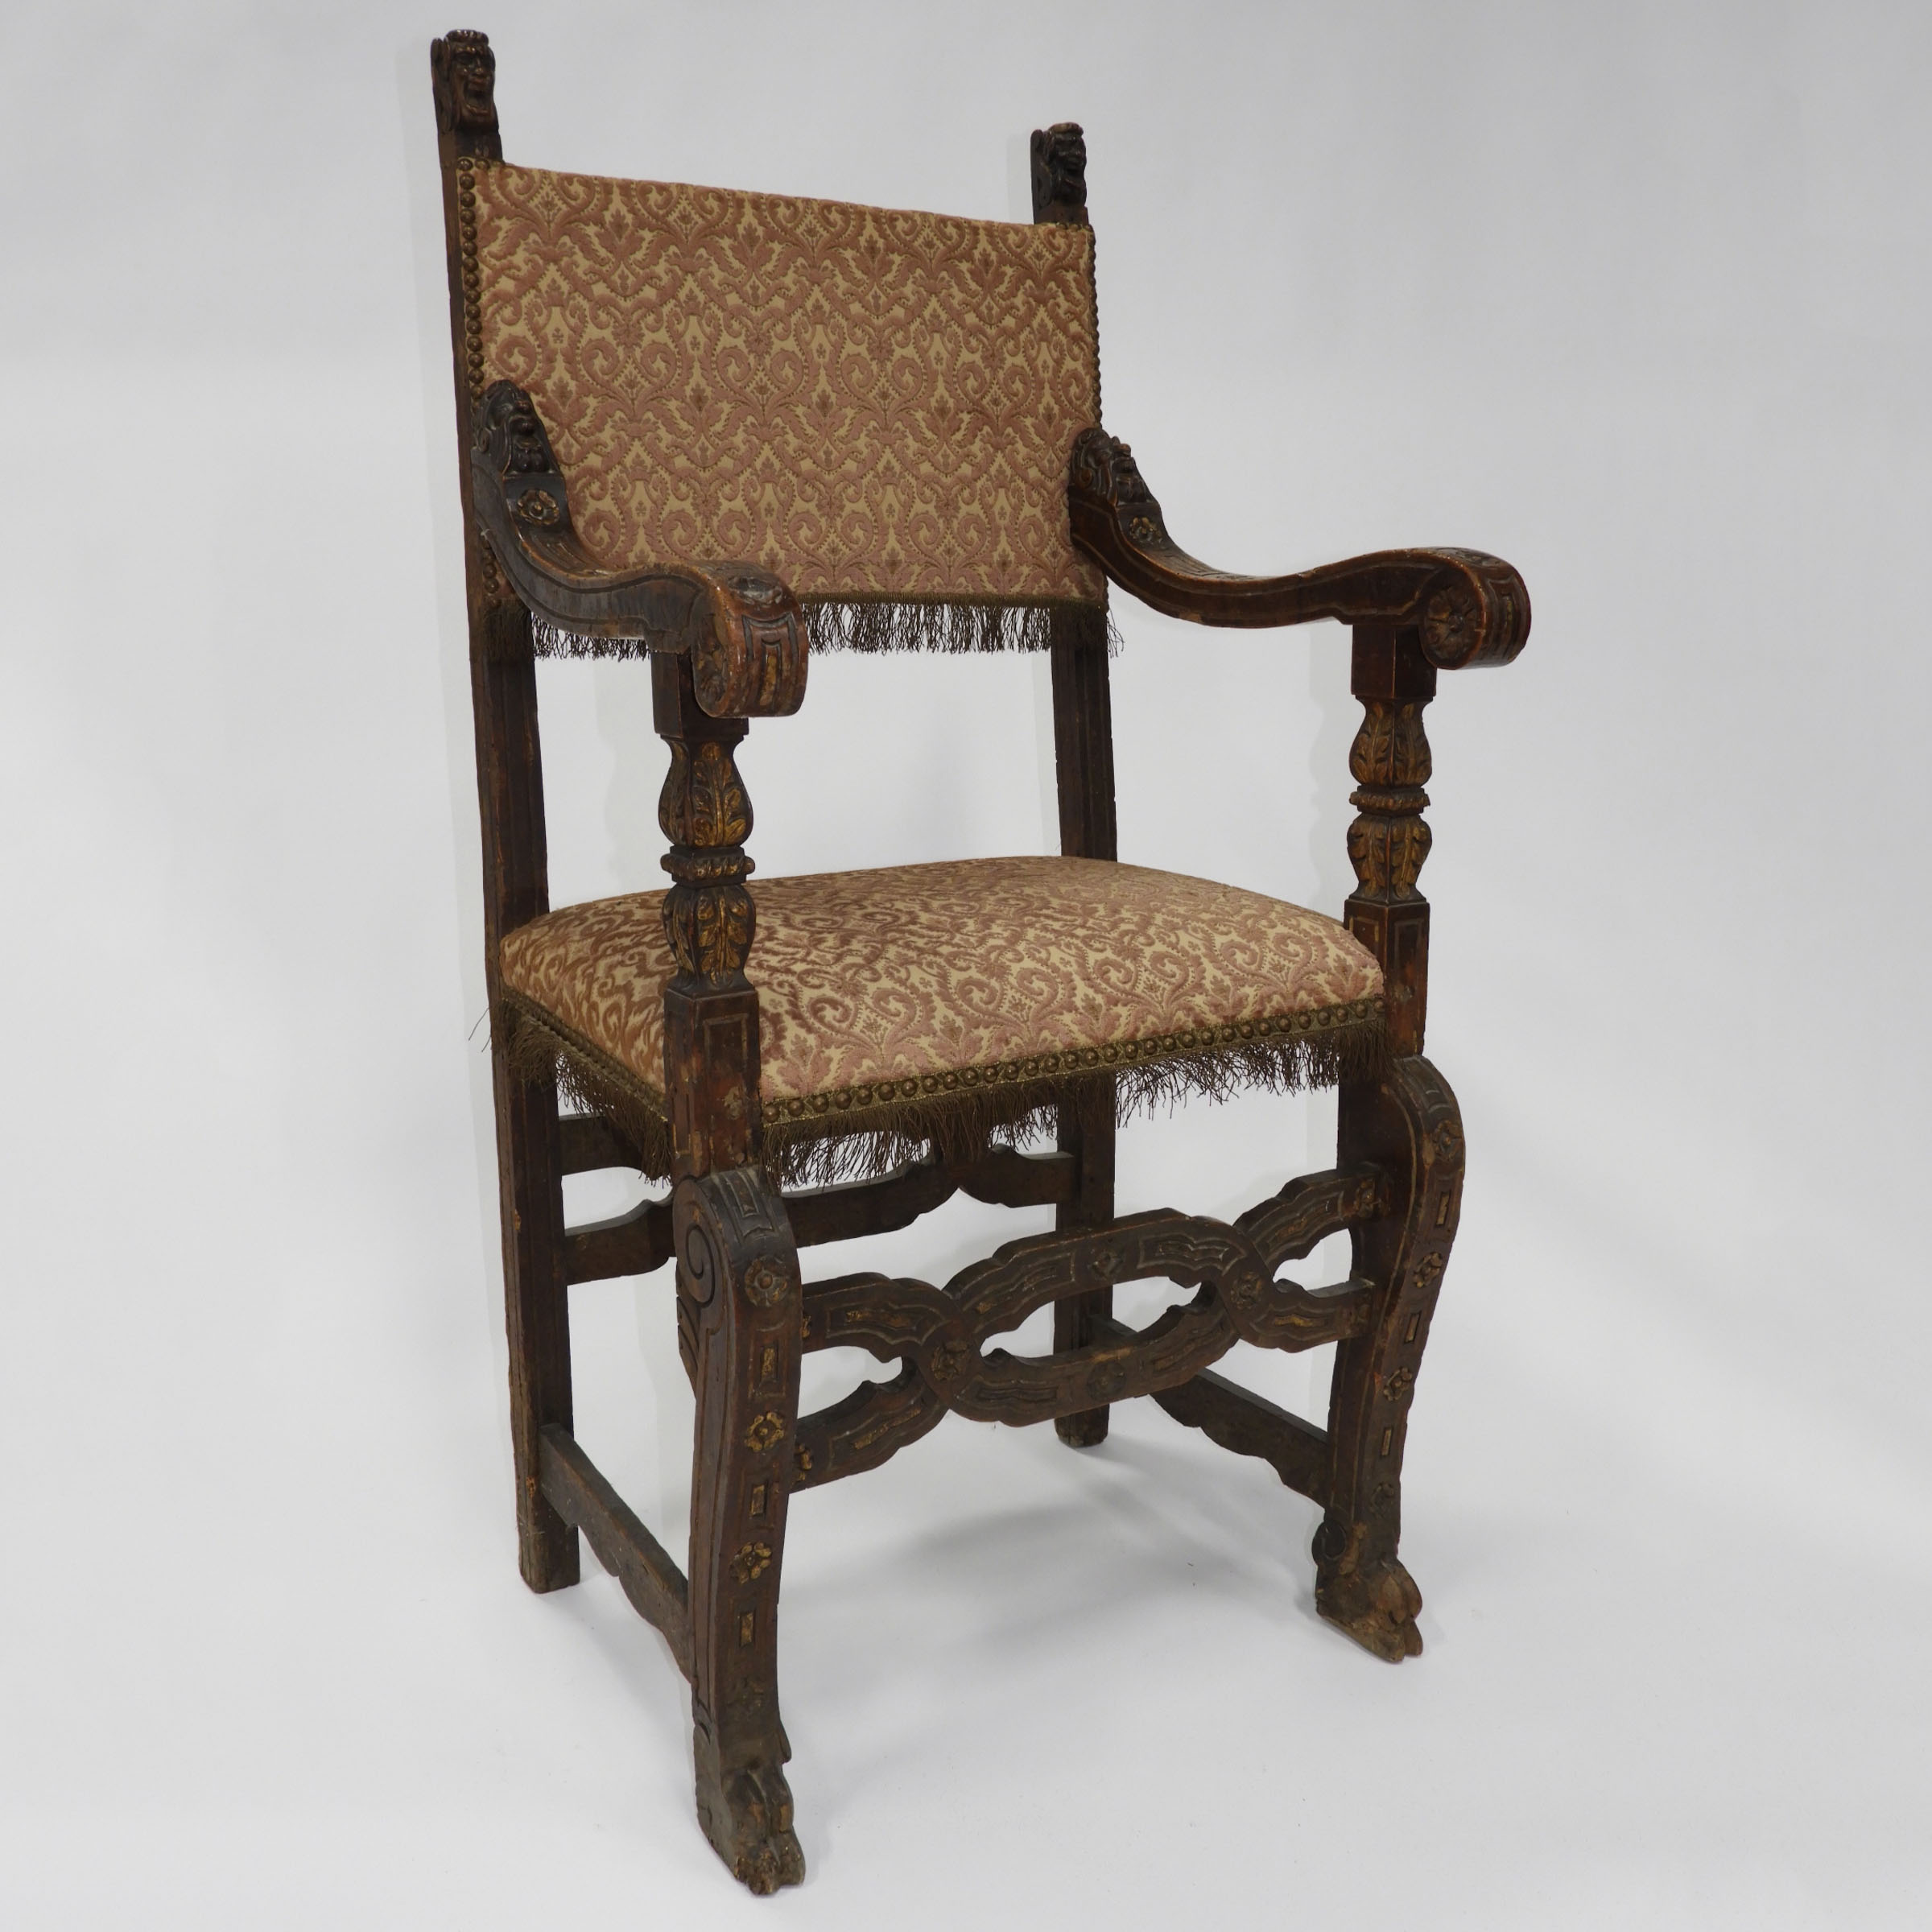 Continental Parcel Gilt Carved Walnut Open Arm Chair, 17th/early 18th century